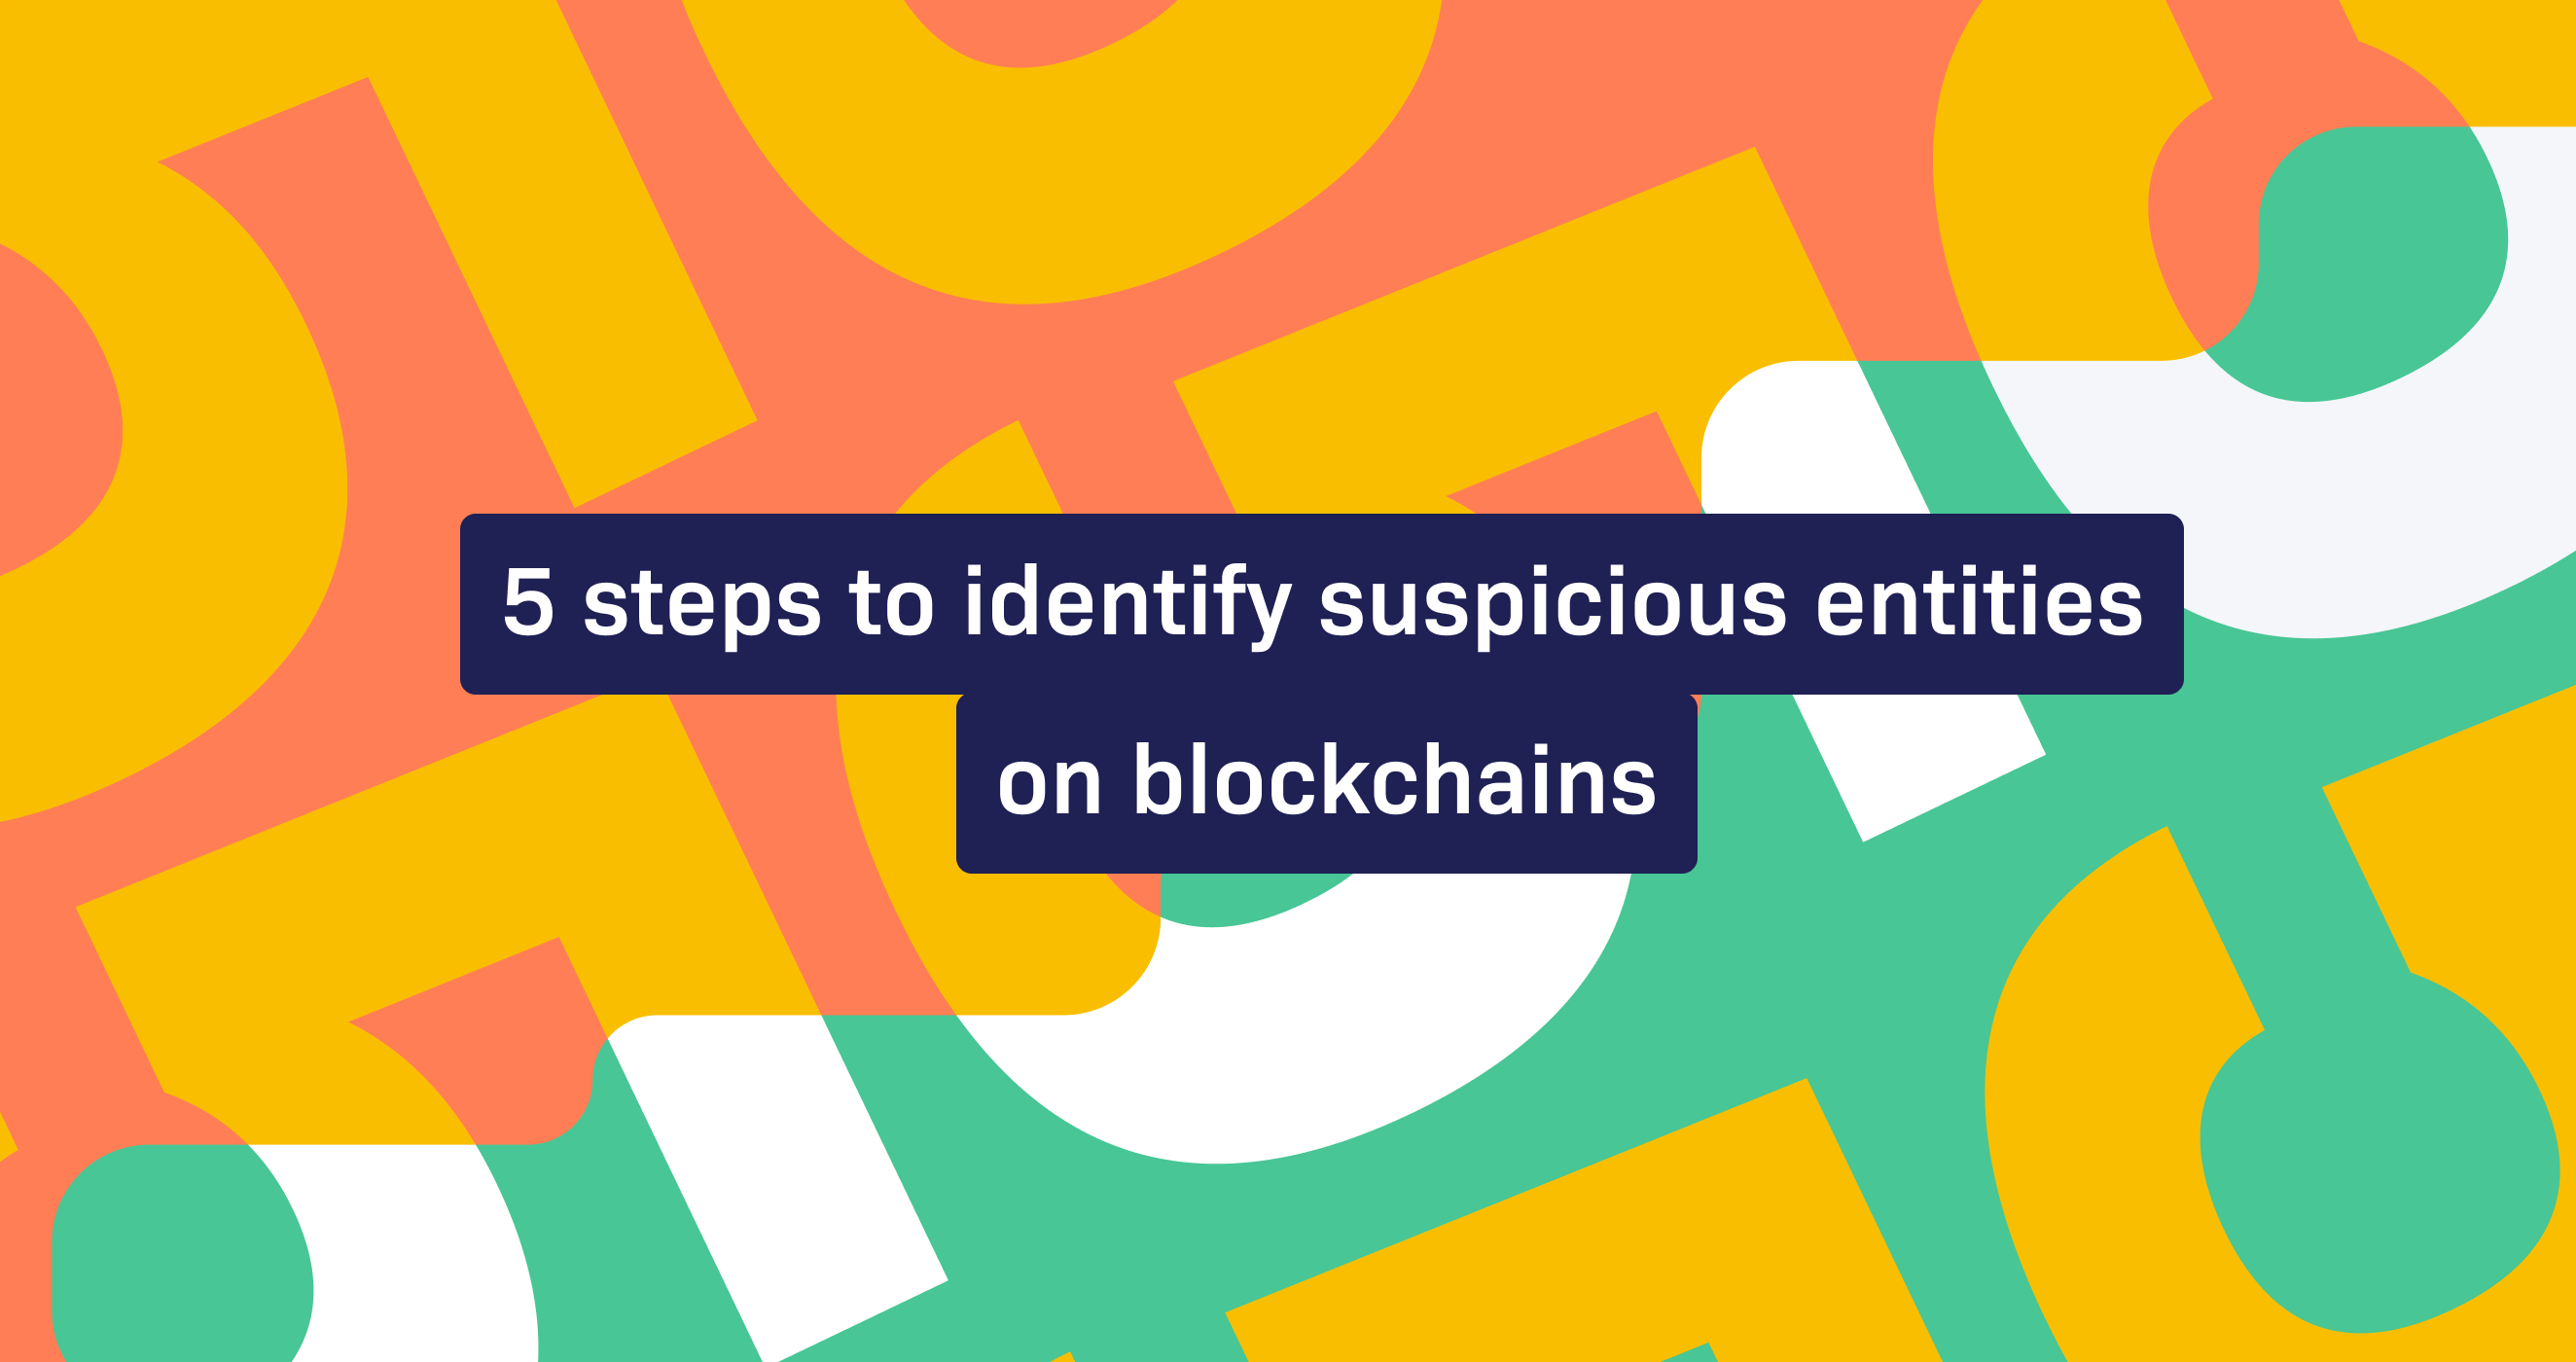 5 steps to identify suspicious entities on blockchains